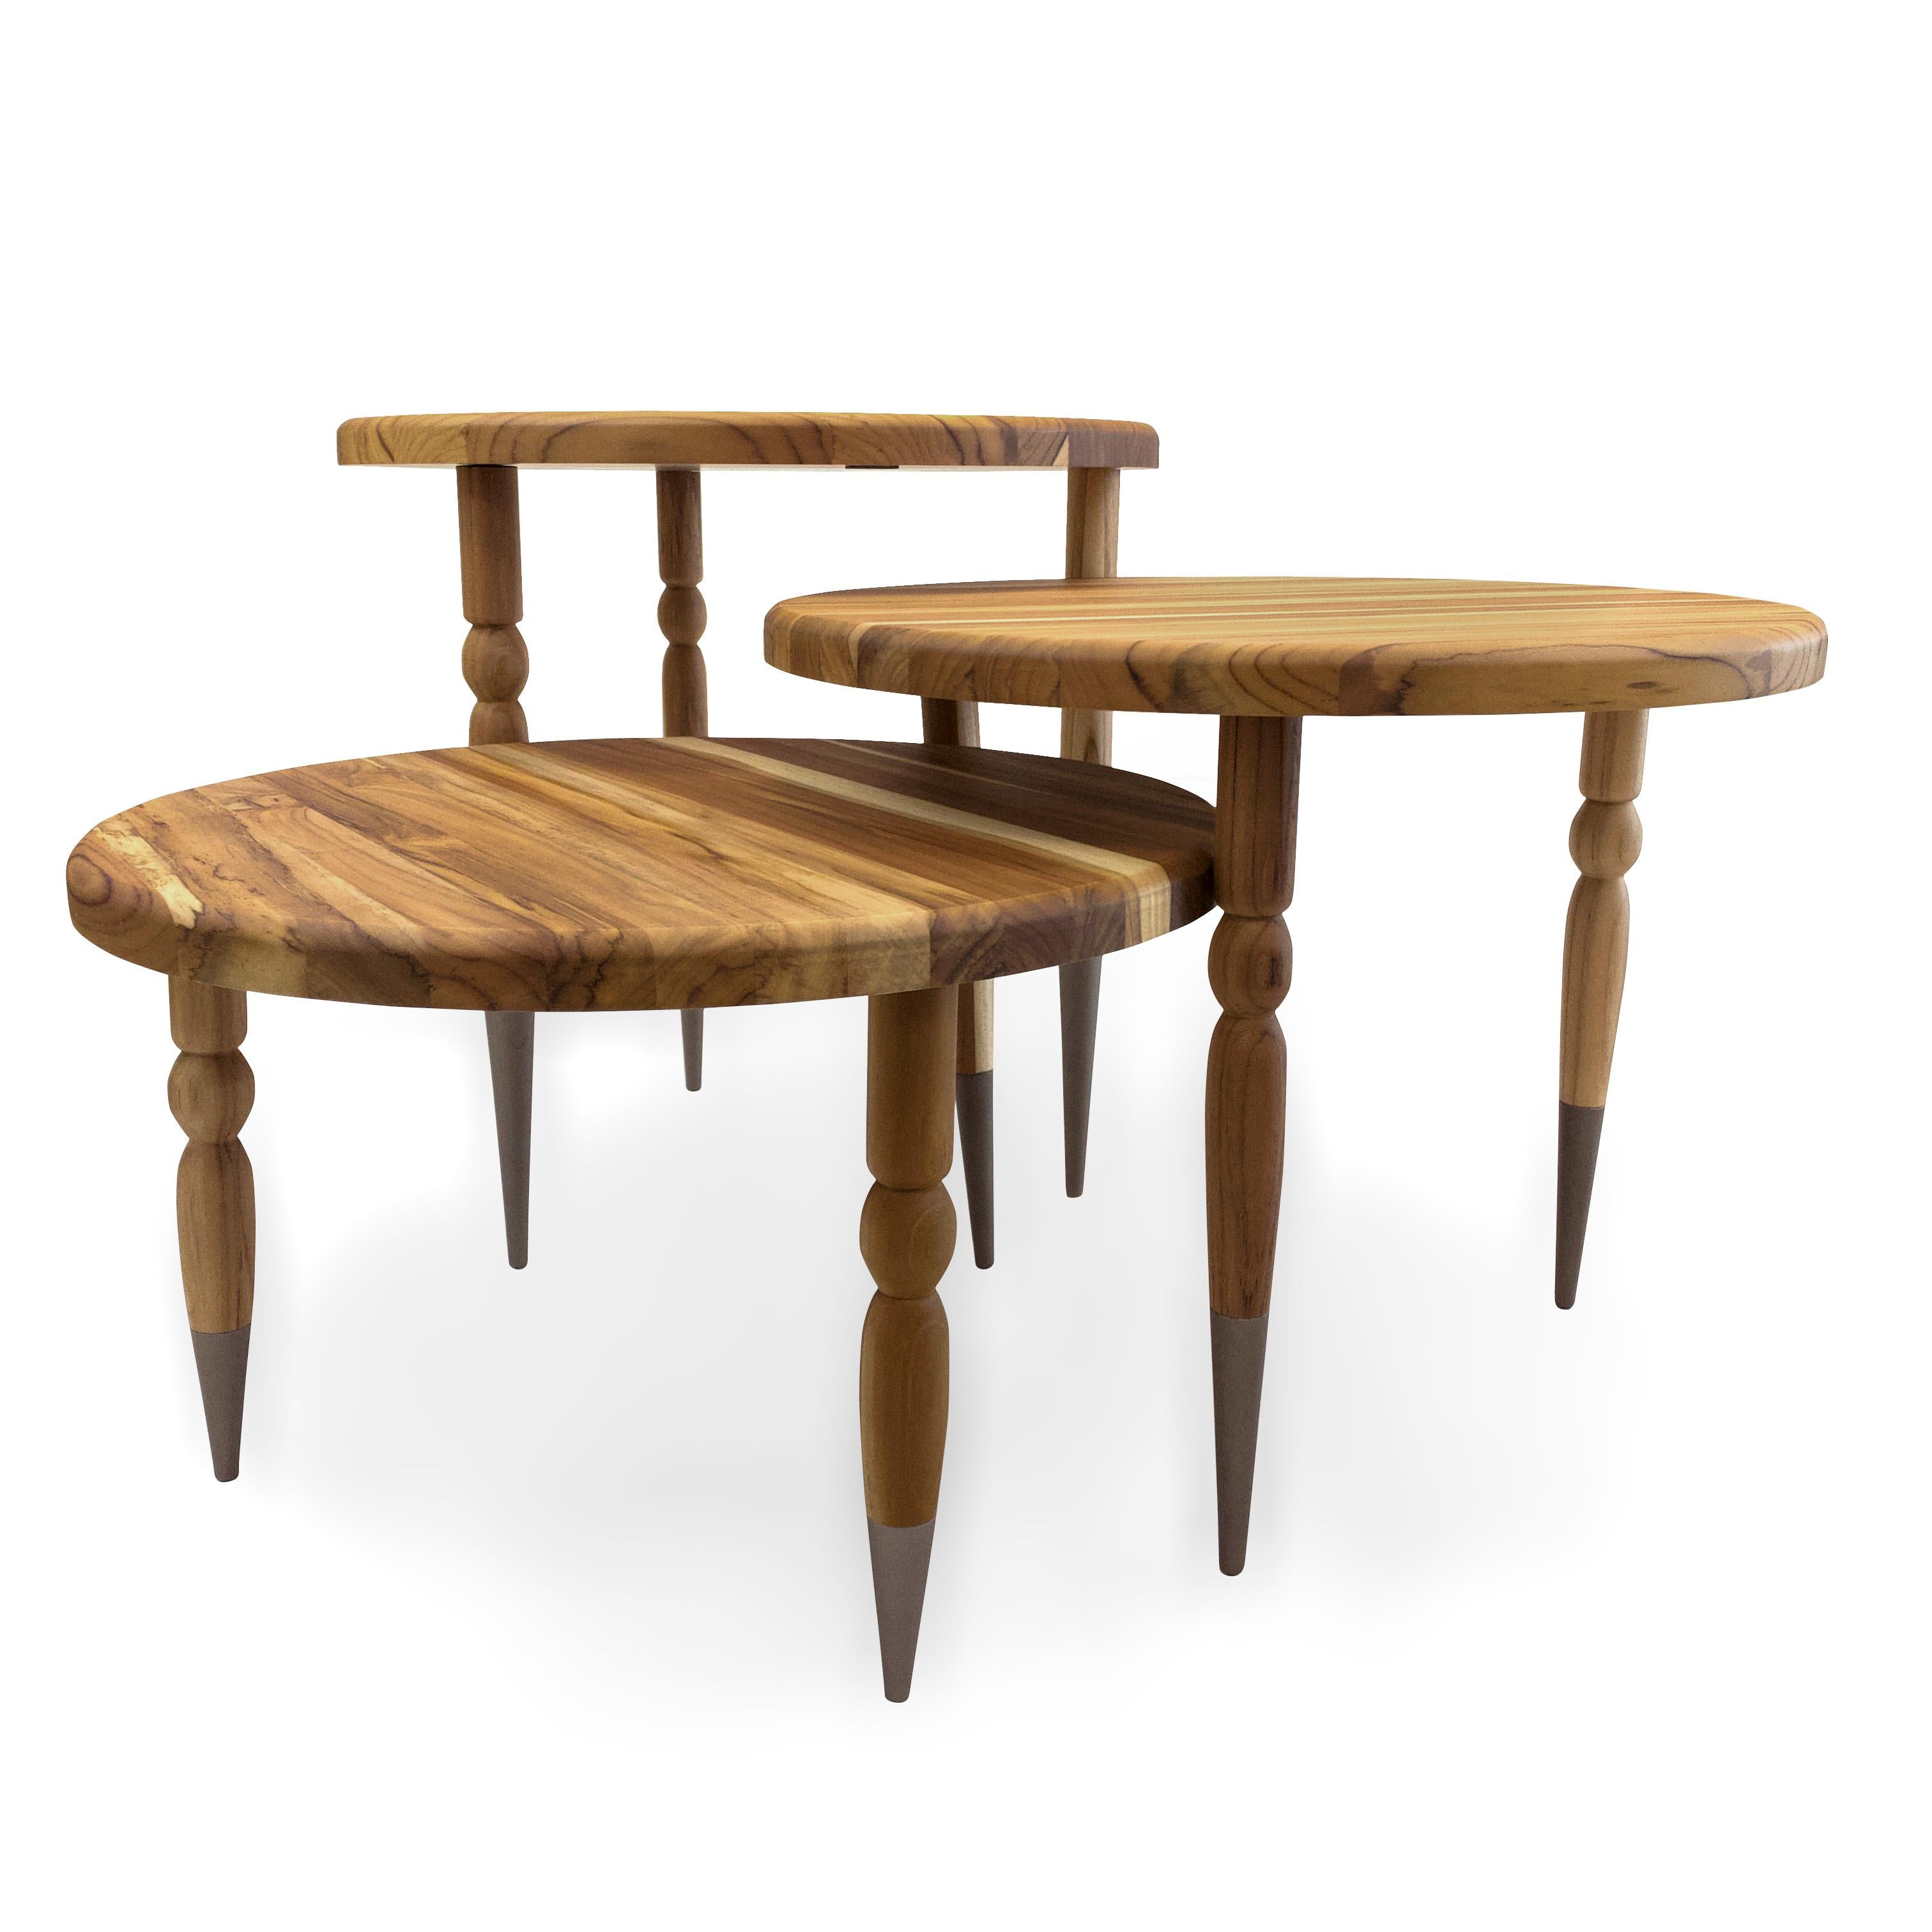 Contemporary Palo Side Table in Teak Wood with Chocolate Turned Spindle Legs, Set of 3 For Sale